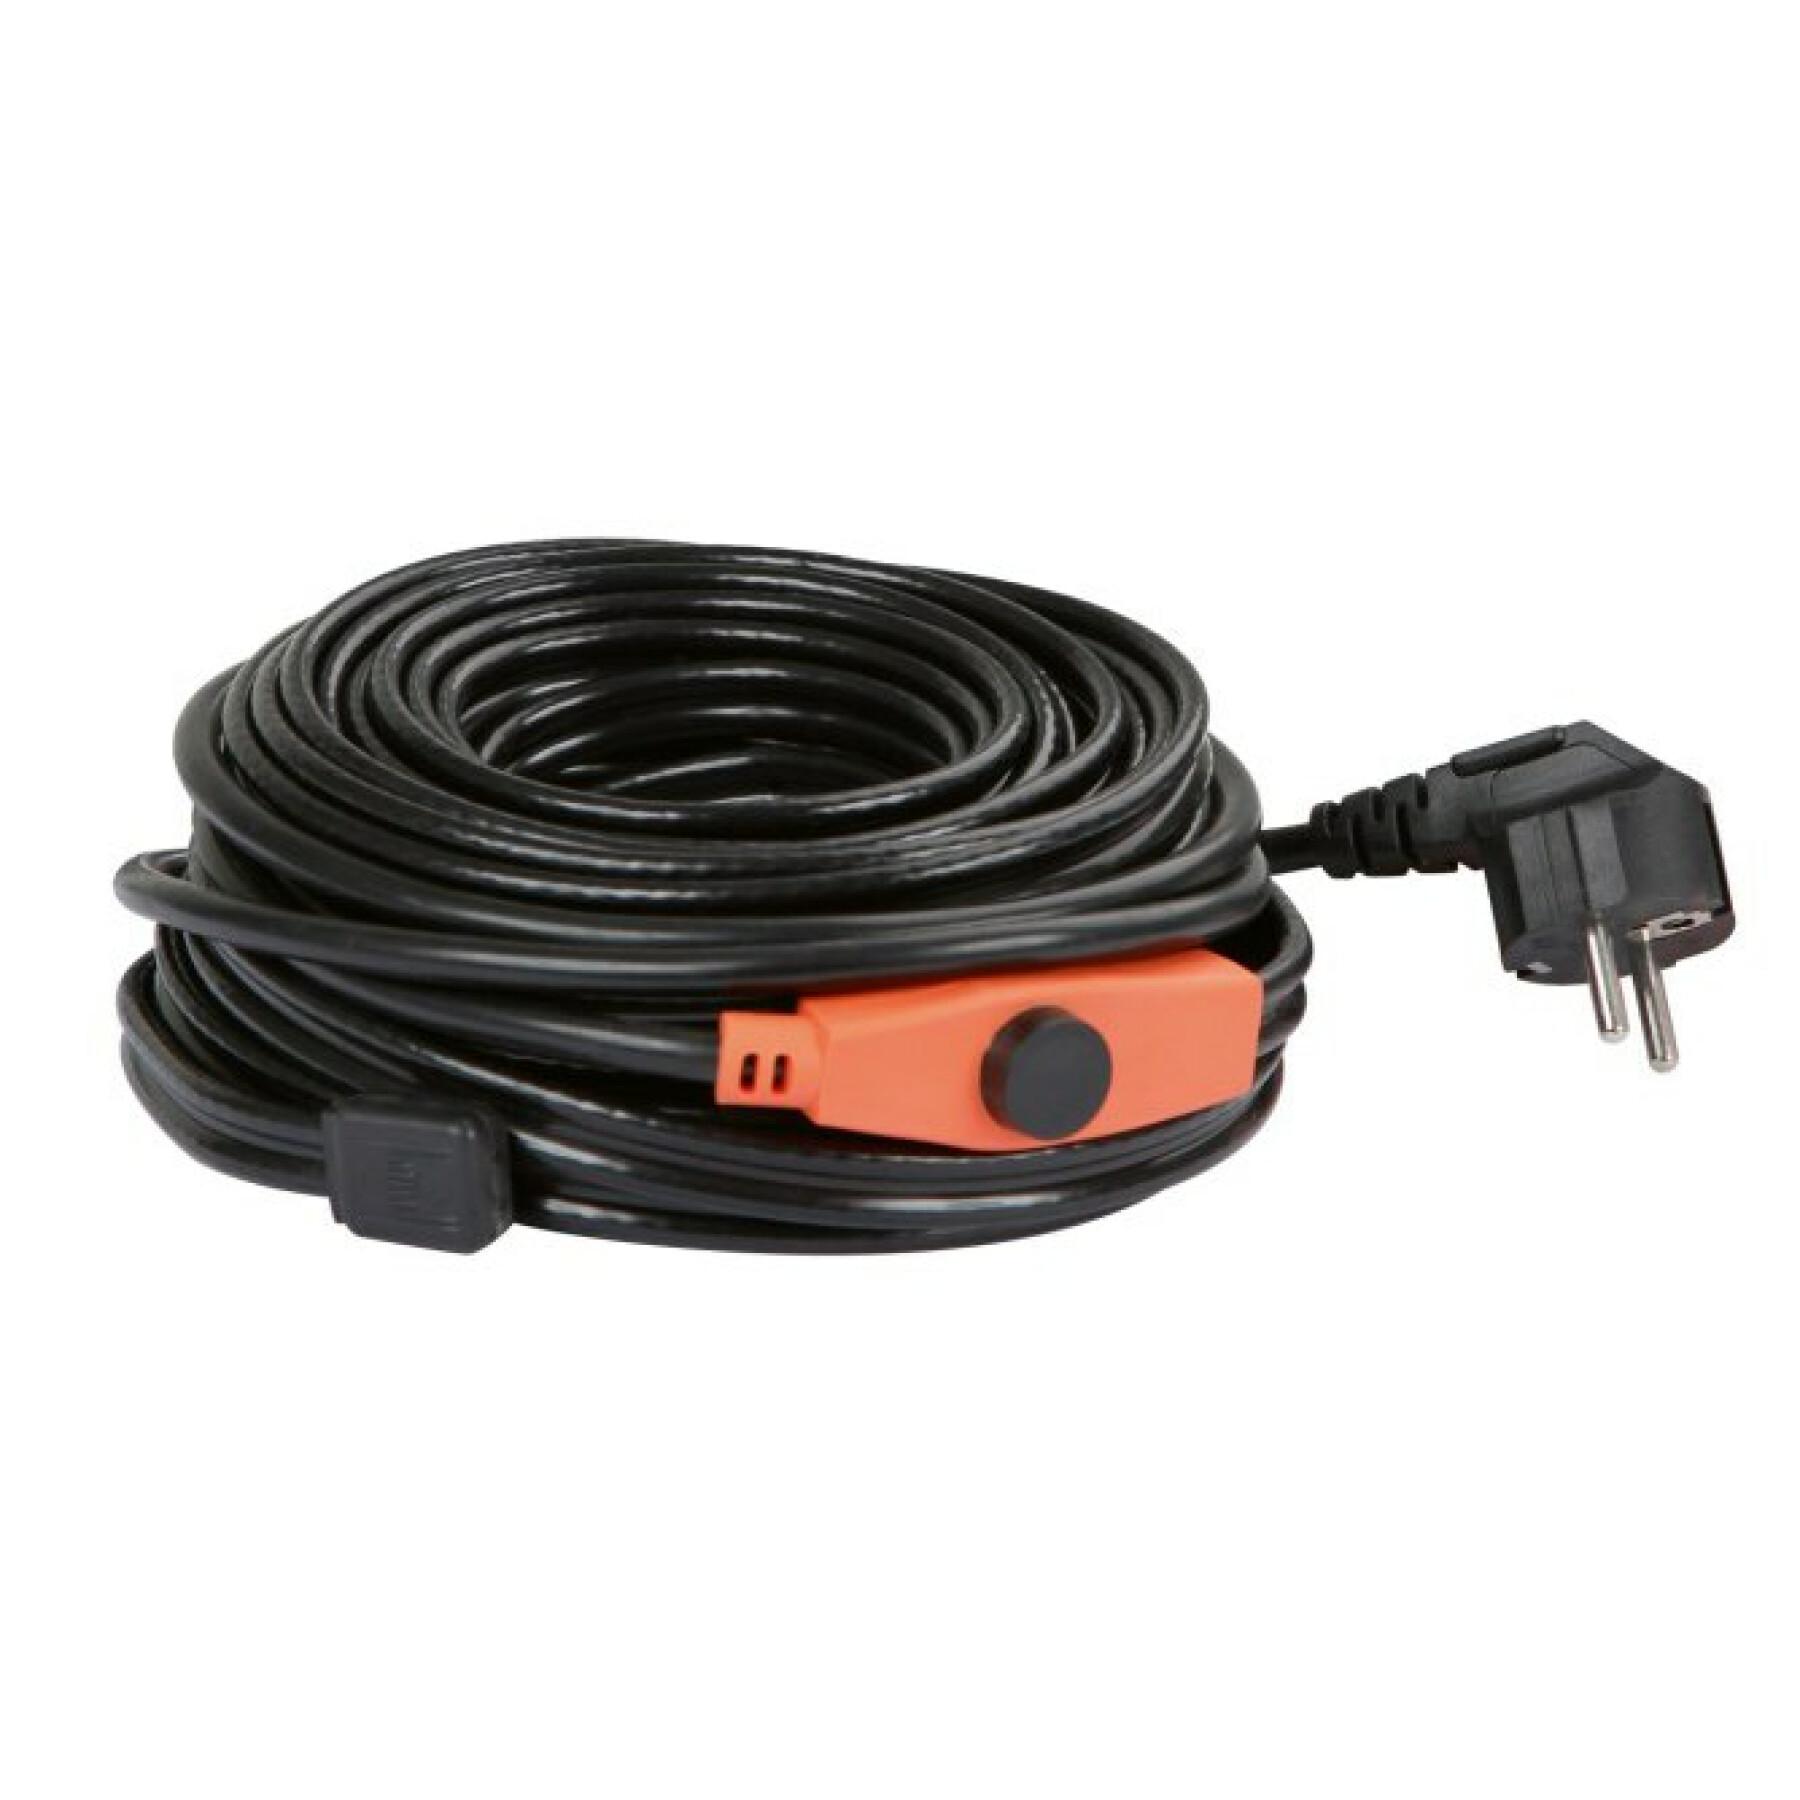 Heating cable Kerbl 230V 37m,592W